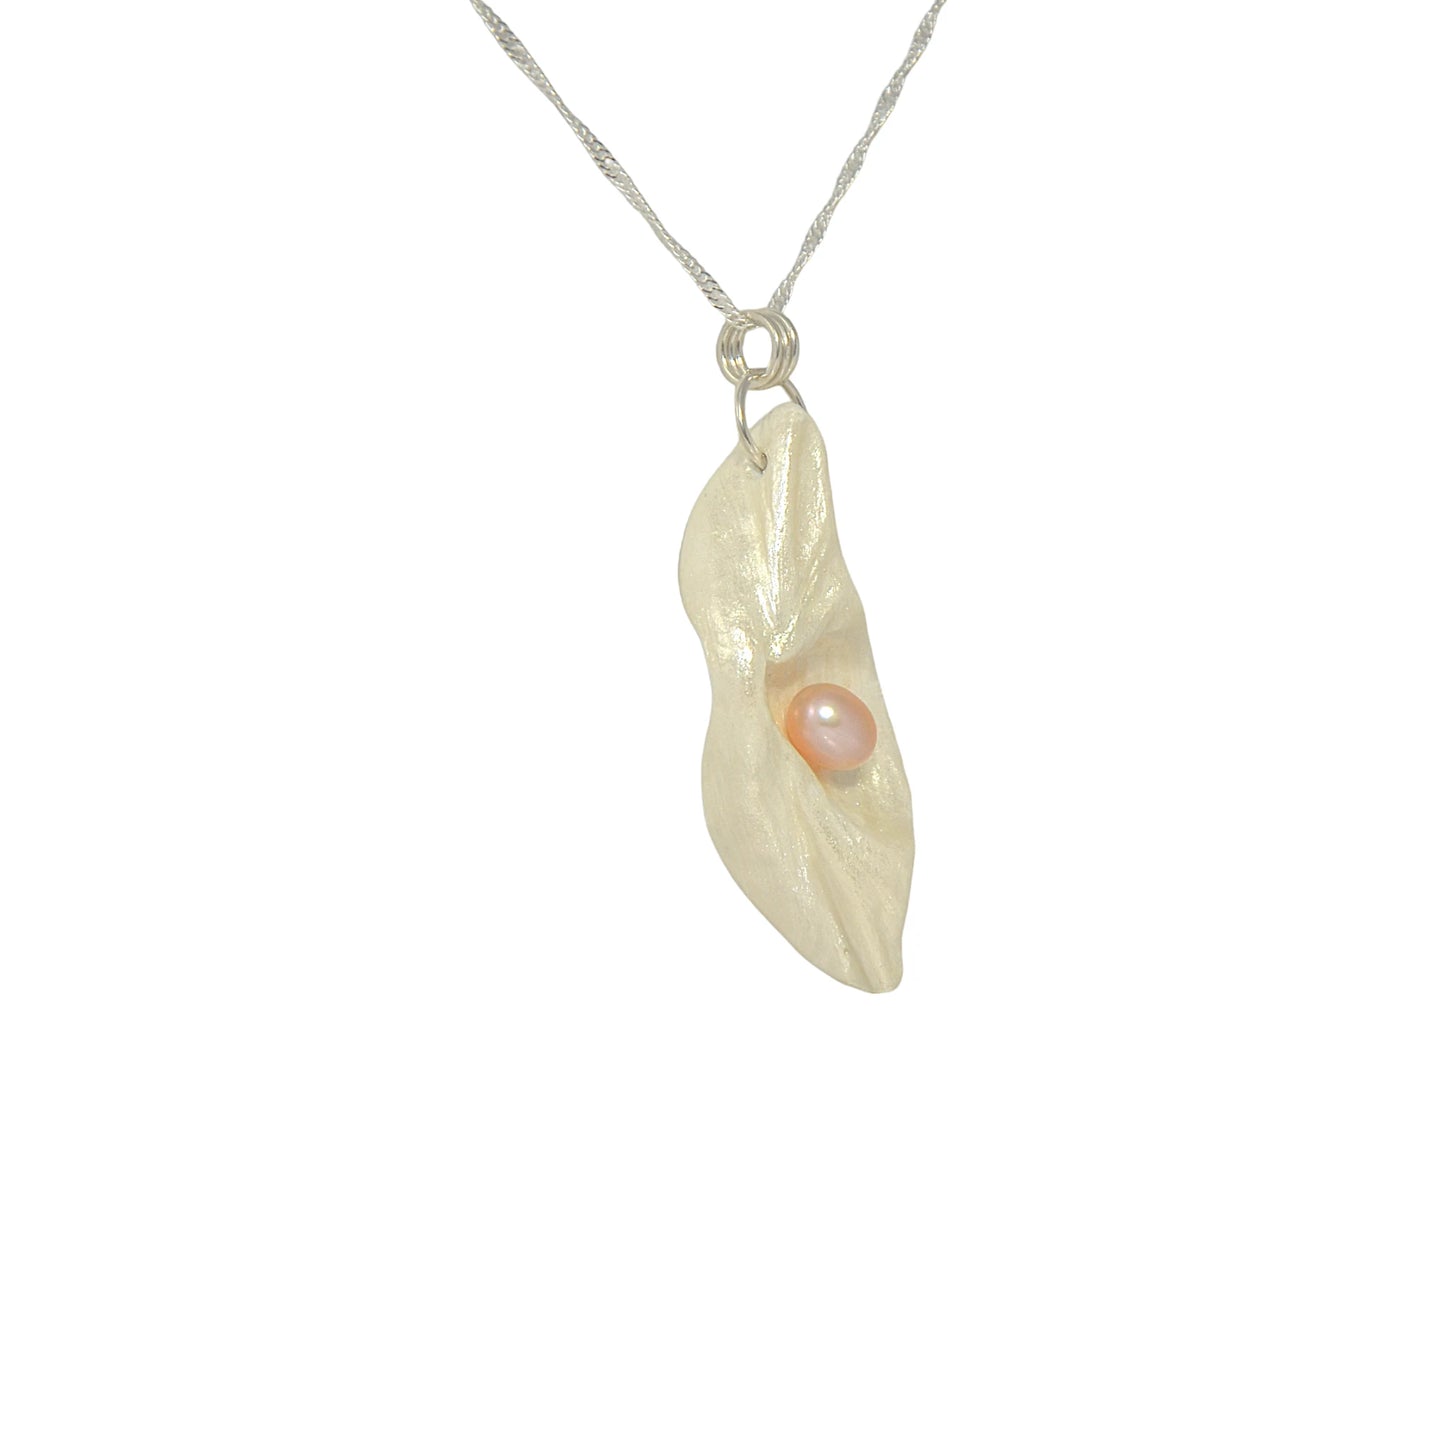 Glow natural seashell pendant with a pink freshwater pearl.  The pendant is turned so the viewer can see the right side of the pendant.